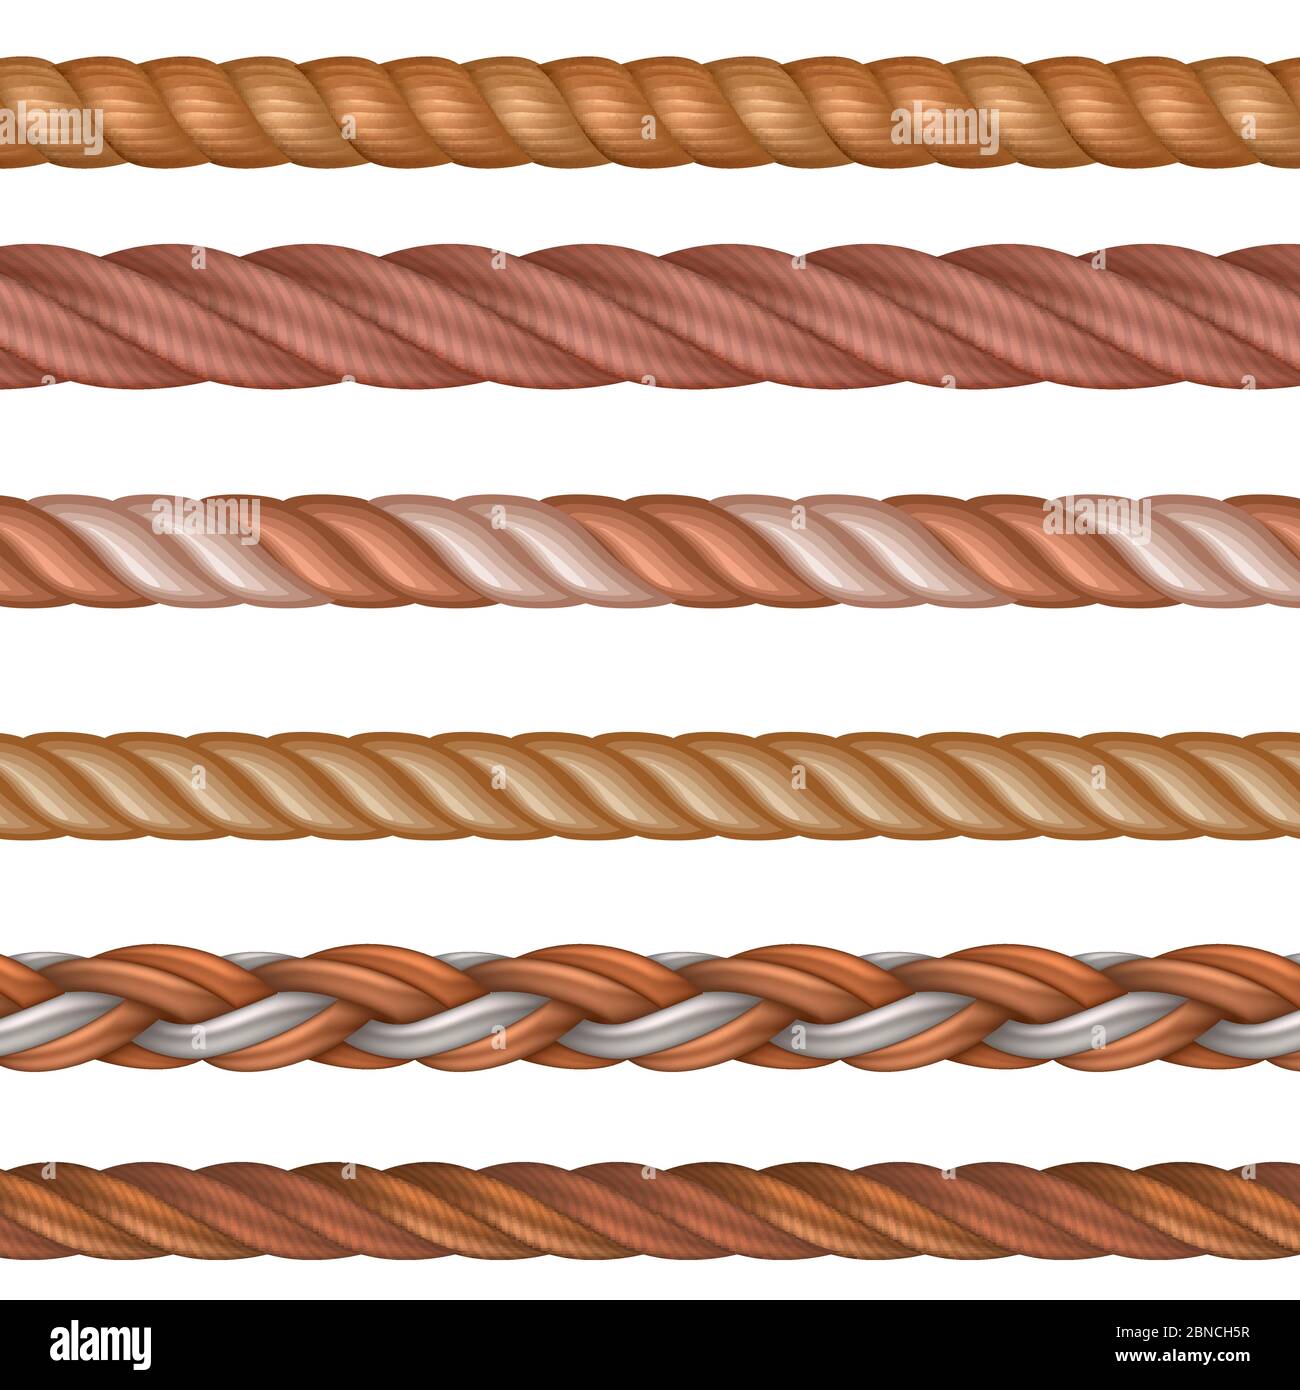 Realistic Rope Vector. Different Thickness Rope Set Isolated On White  Background. Illustration Of Twisted Nautical Thick Lines. Graphic String  Cord For Borders. Stock Vector